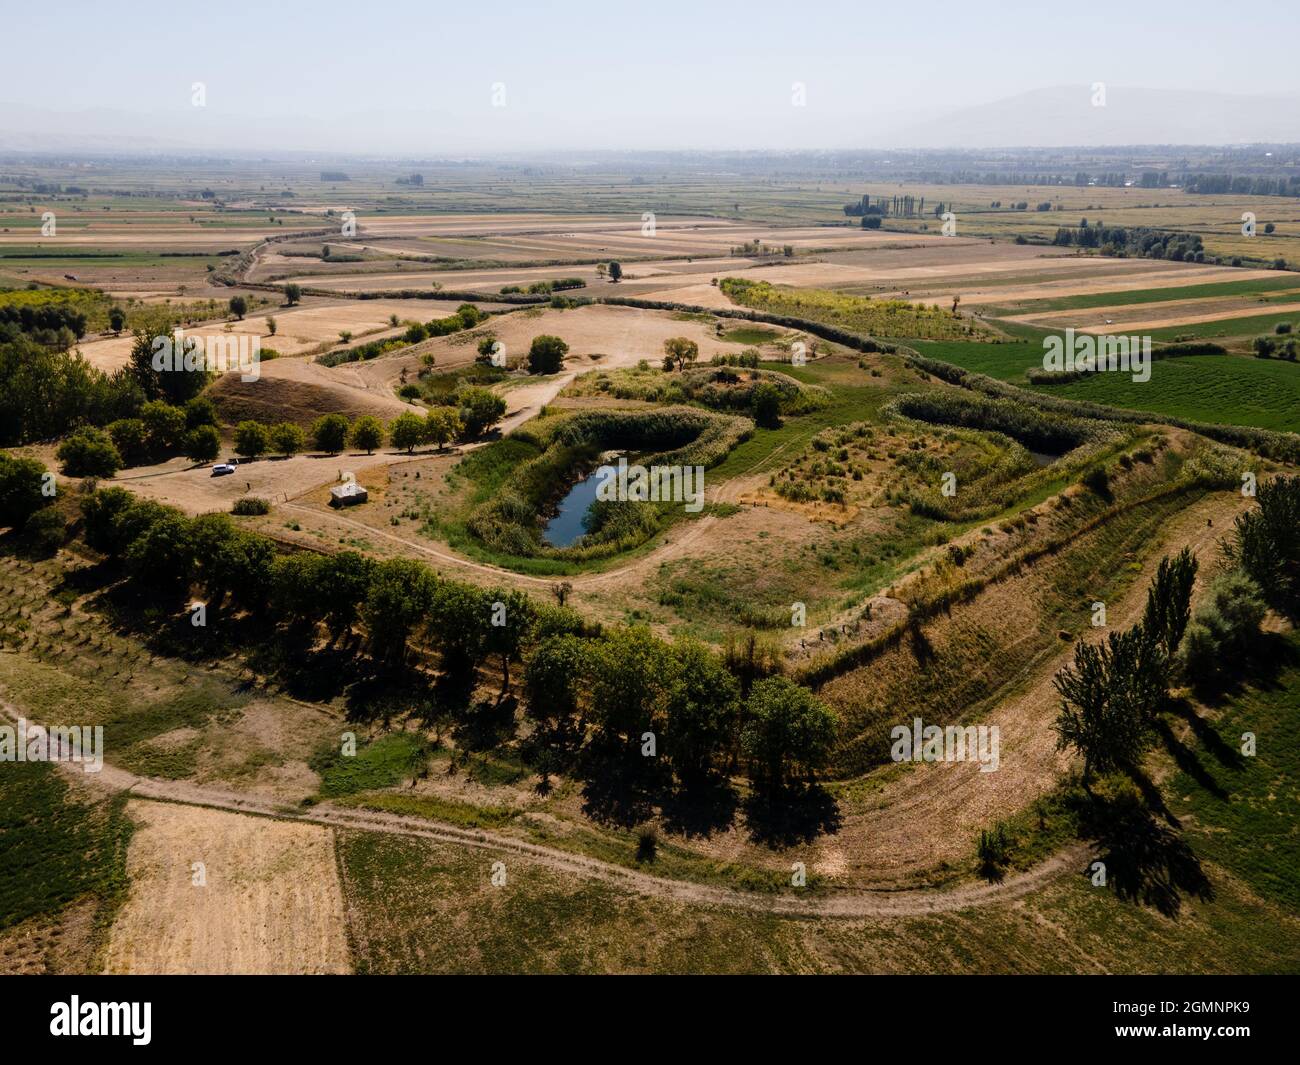 Shoro Bashat Ancient Town in the Osh Oblast of Kyrgyzstan Stock Photo